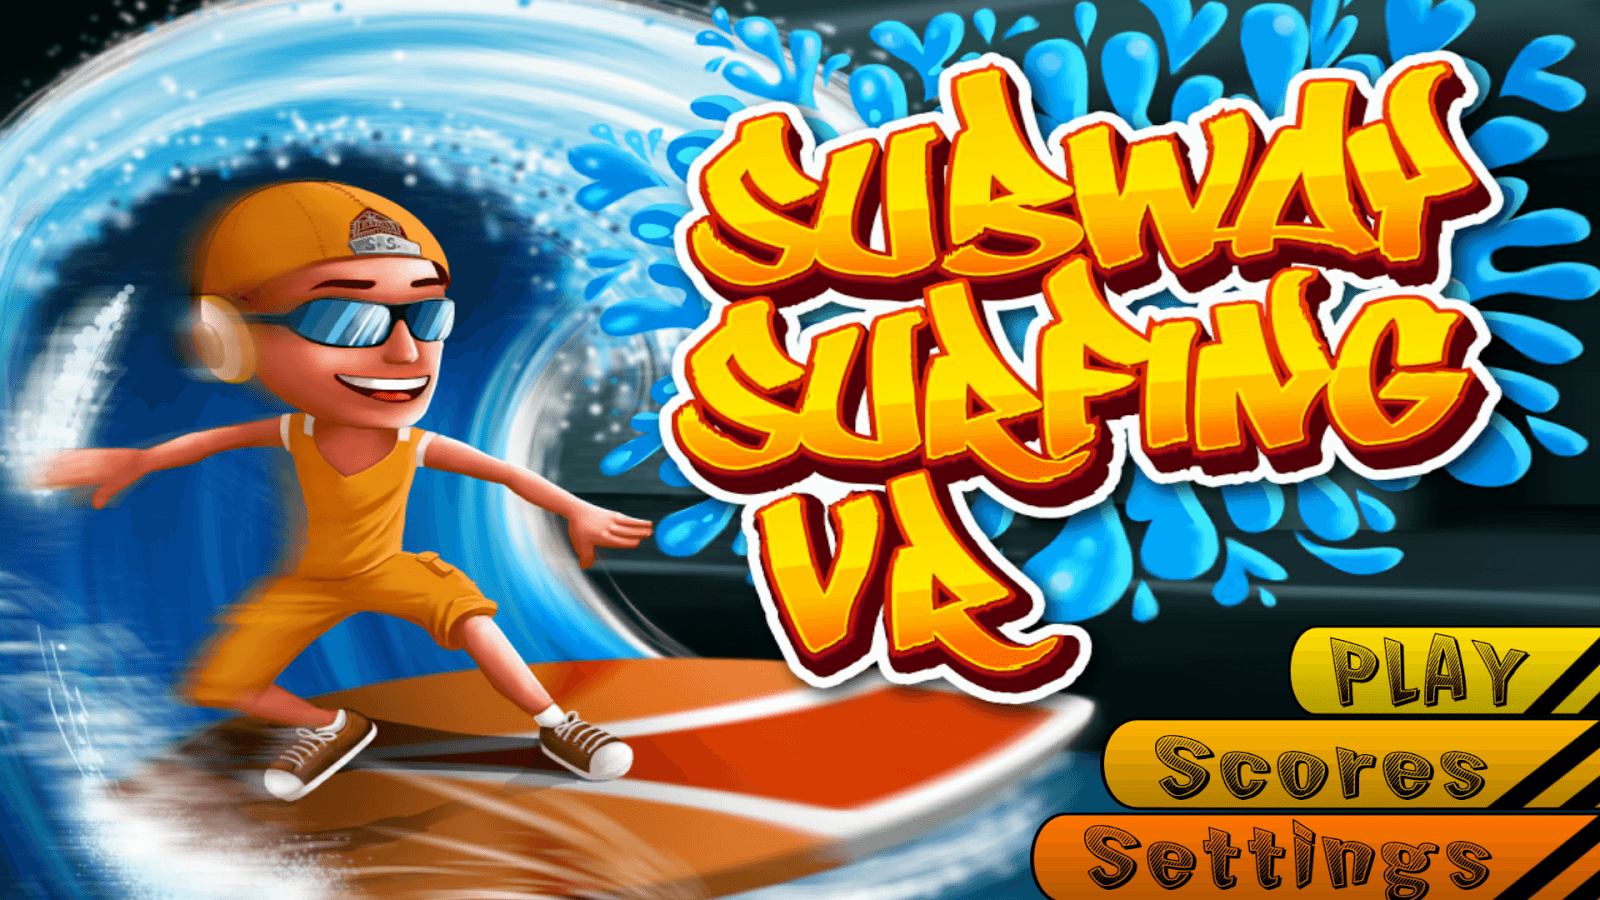 Subway Surfing VR Apps on Google Play